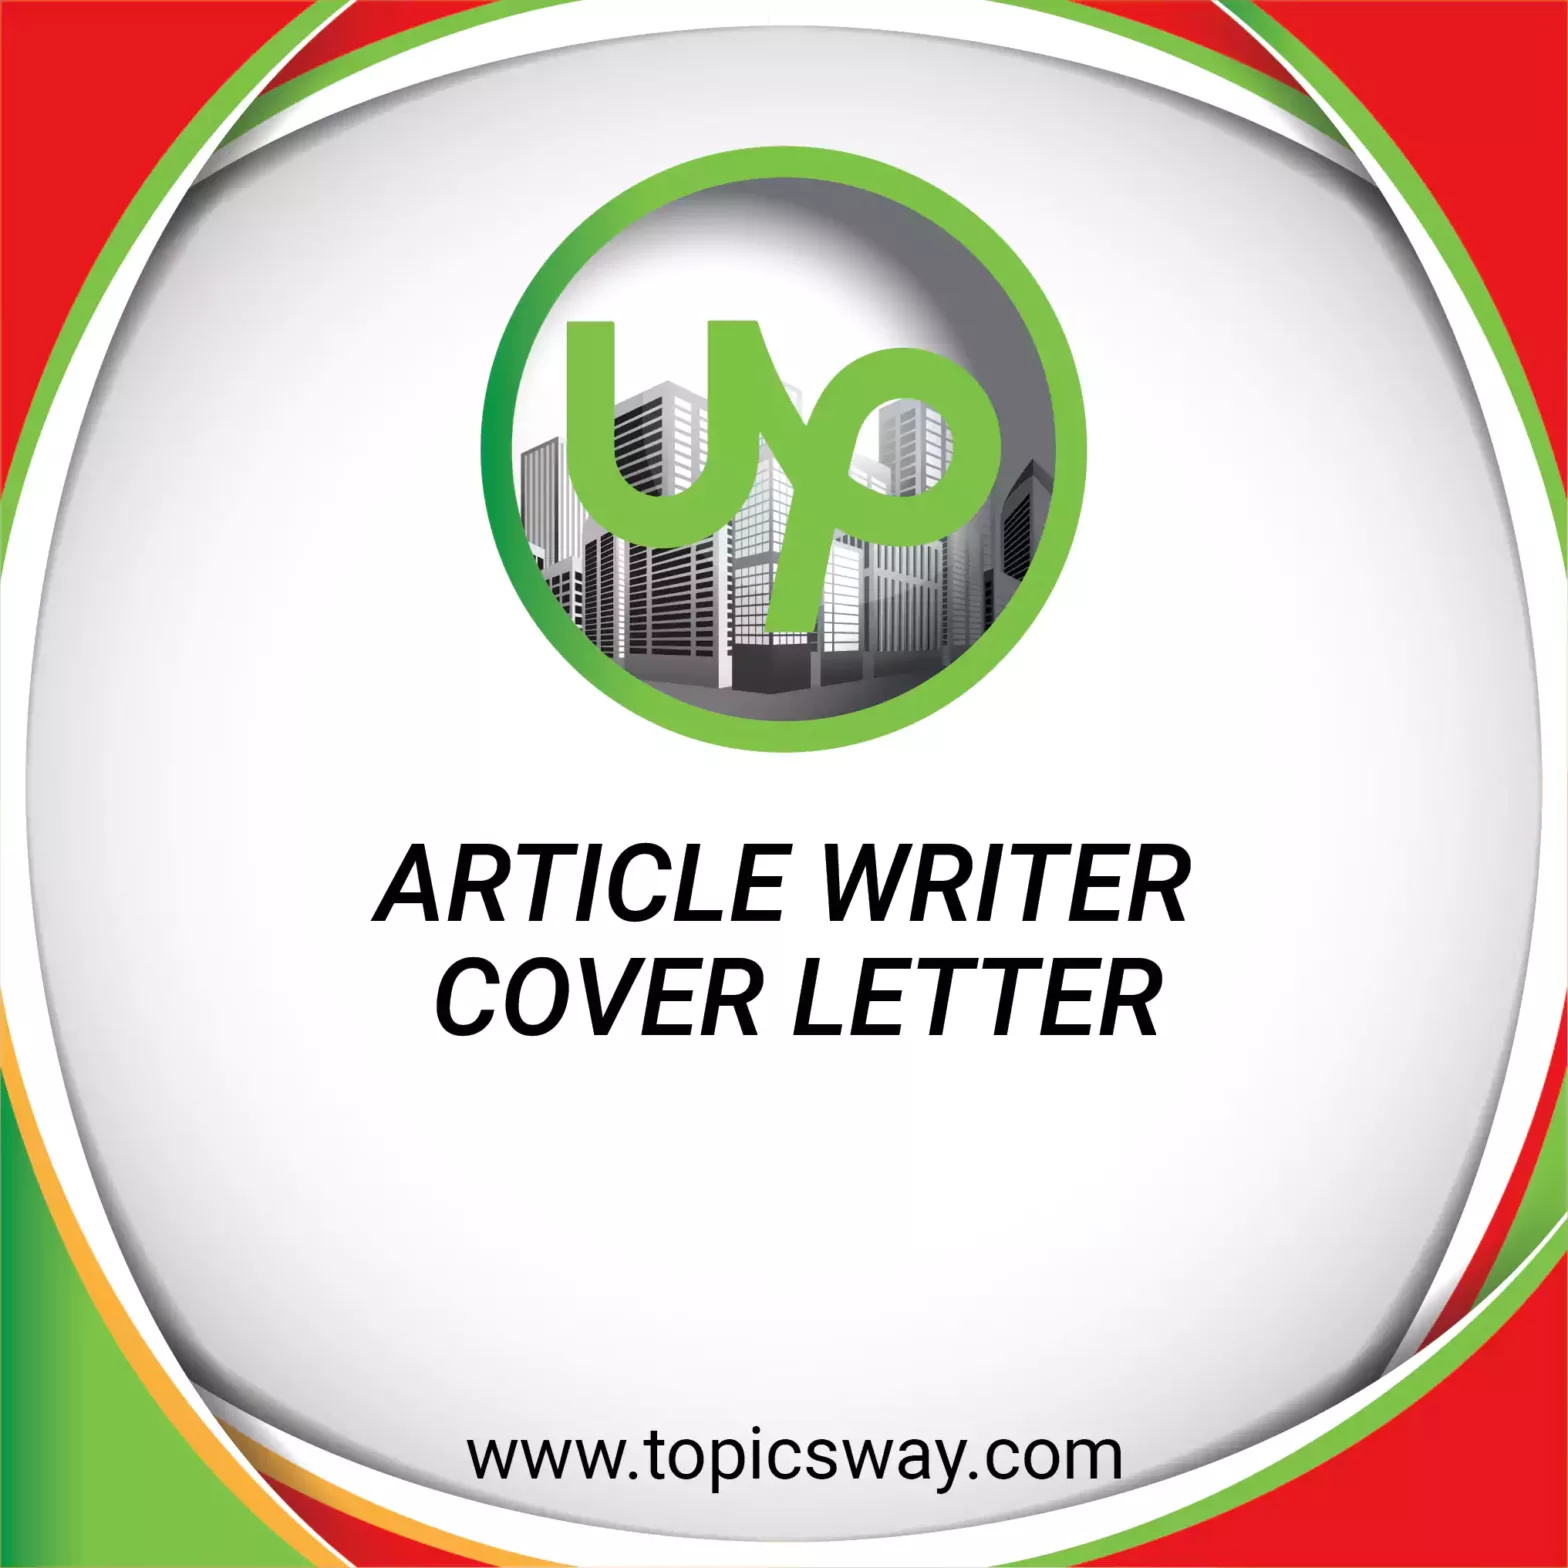 ARTICLE WRITER - COVER LETTER